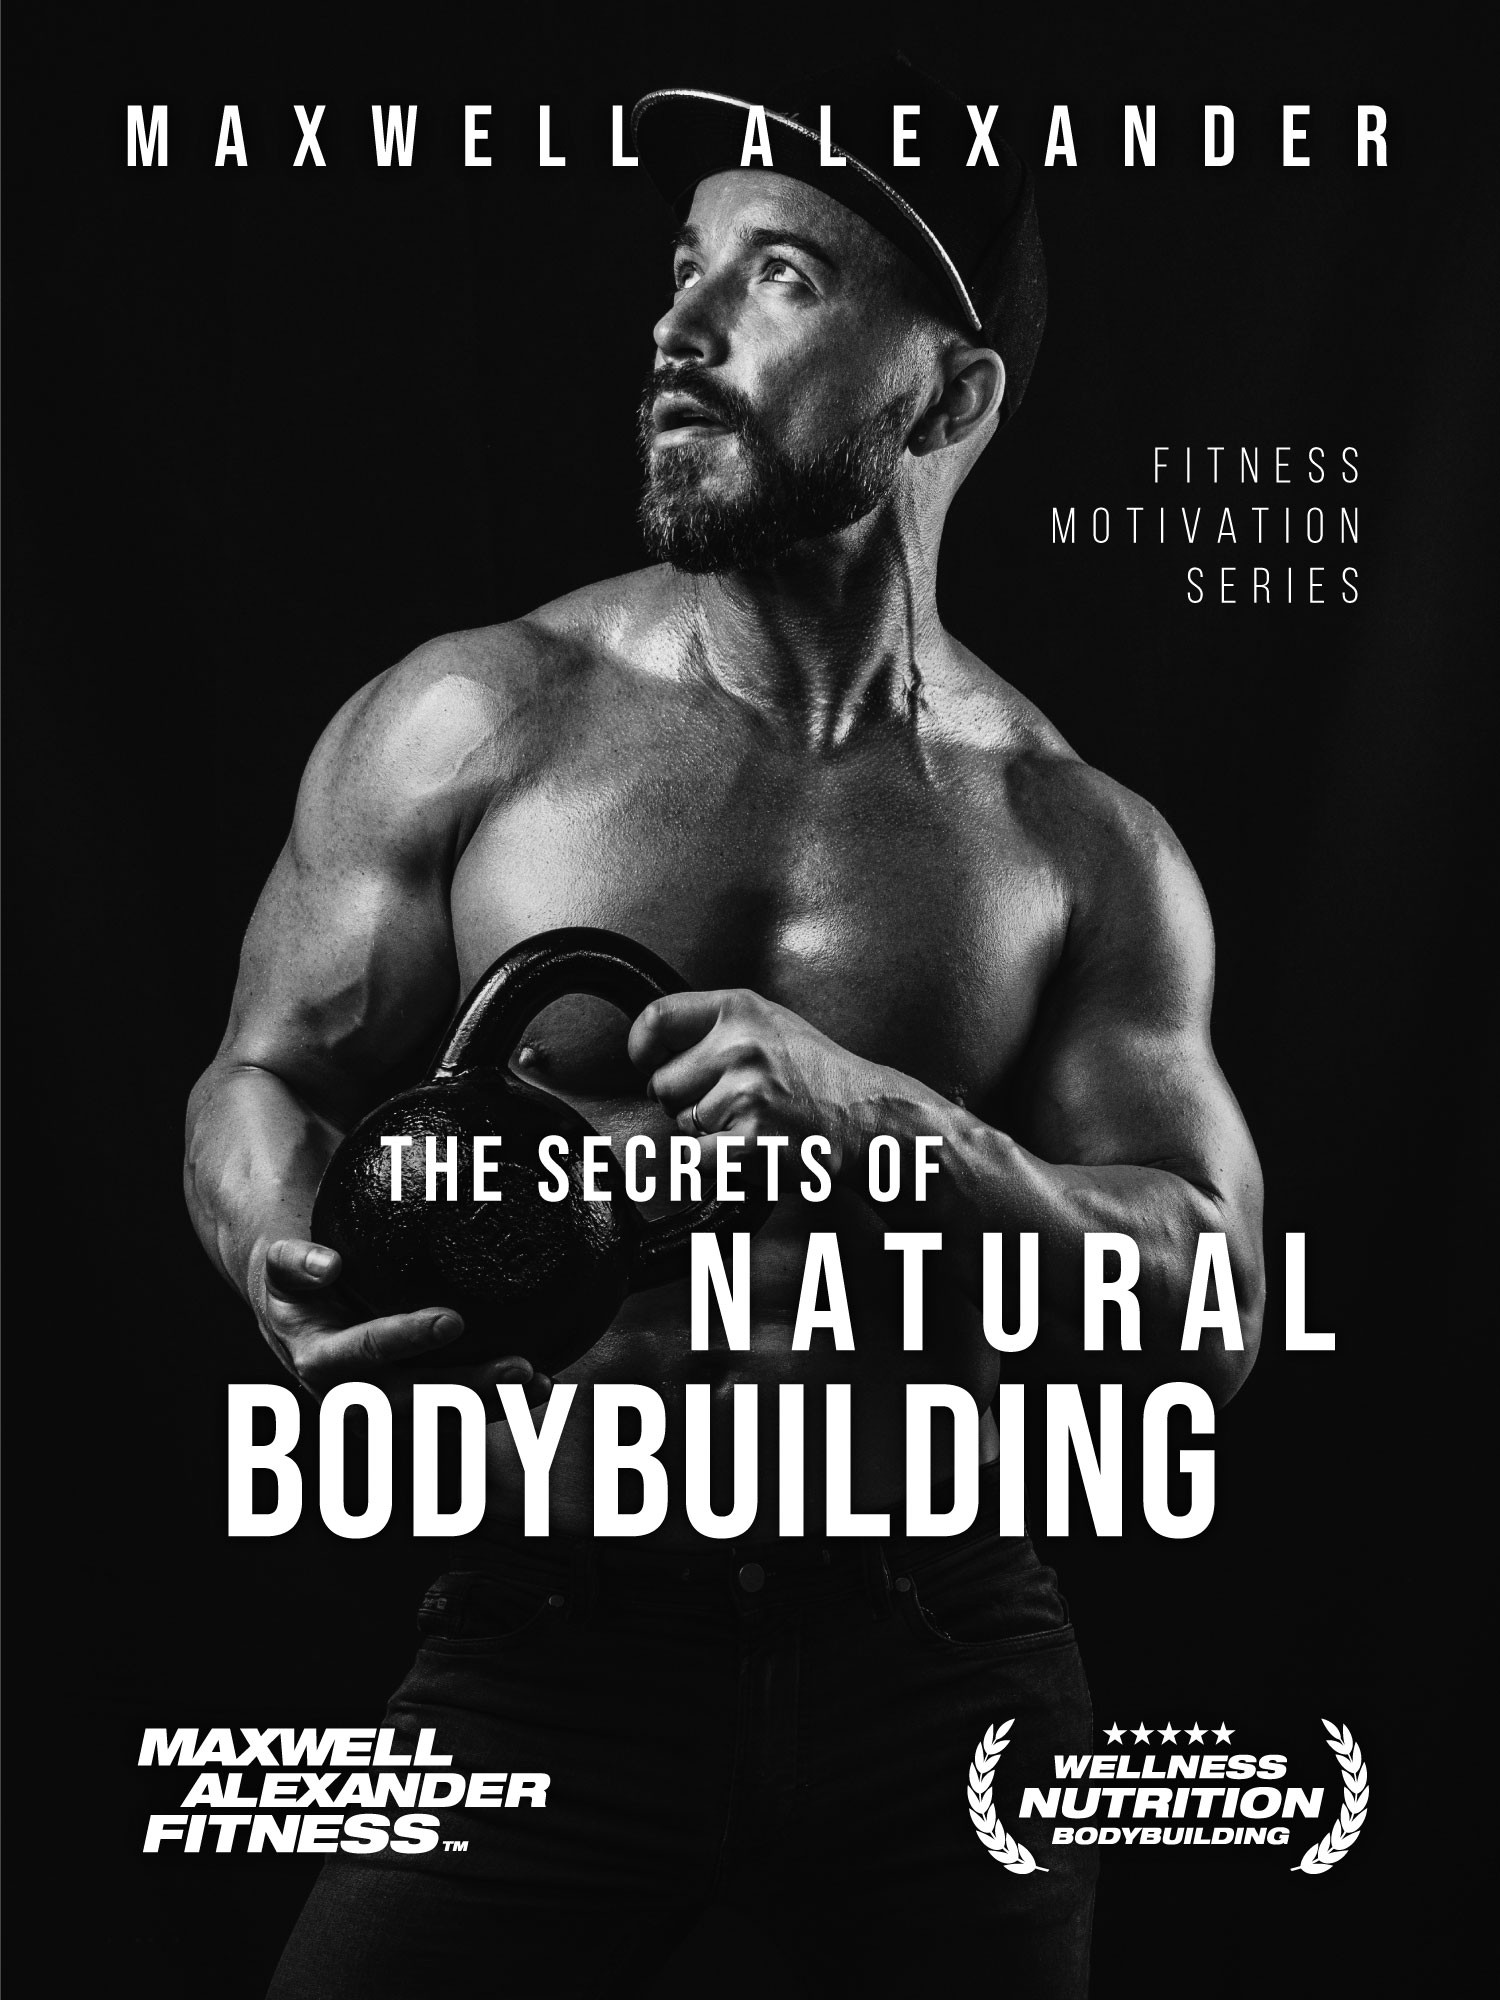 The Secrets of Natural Bodybuilding – Fitness Motivation Book by Maxwell Alexander